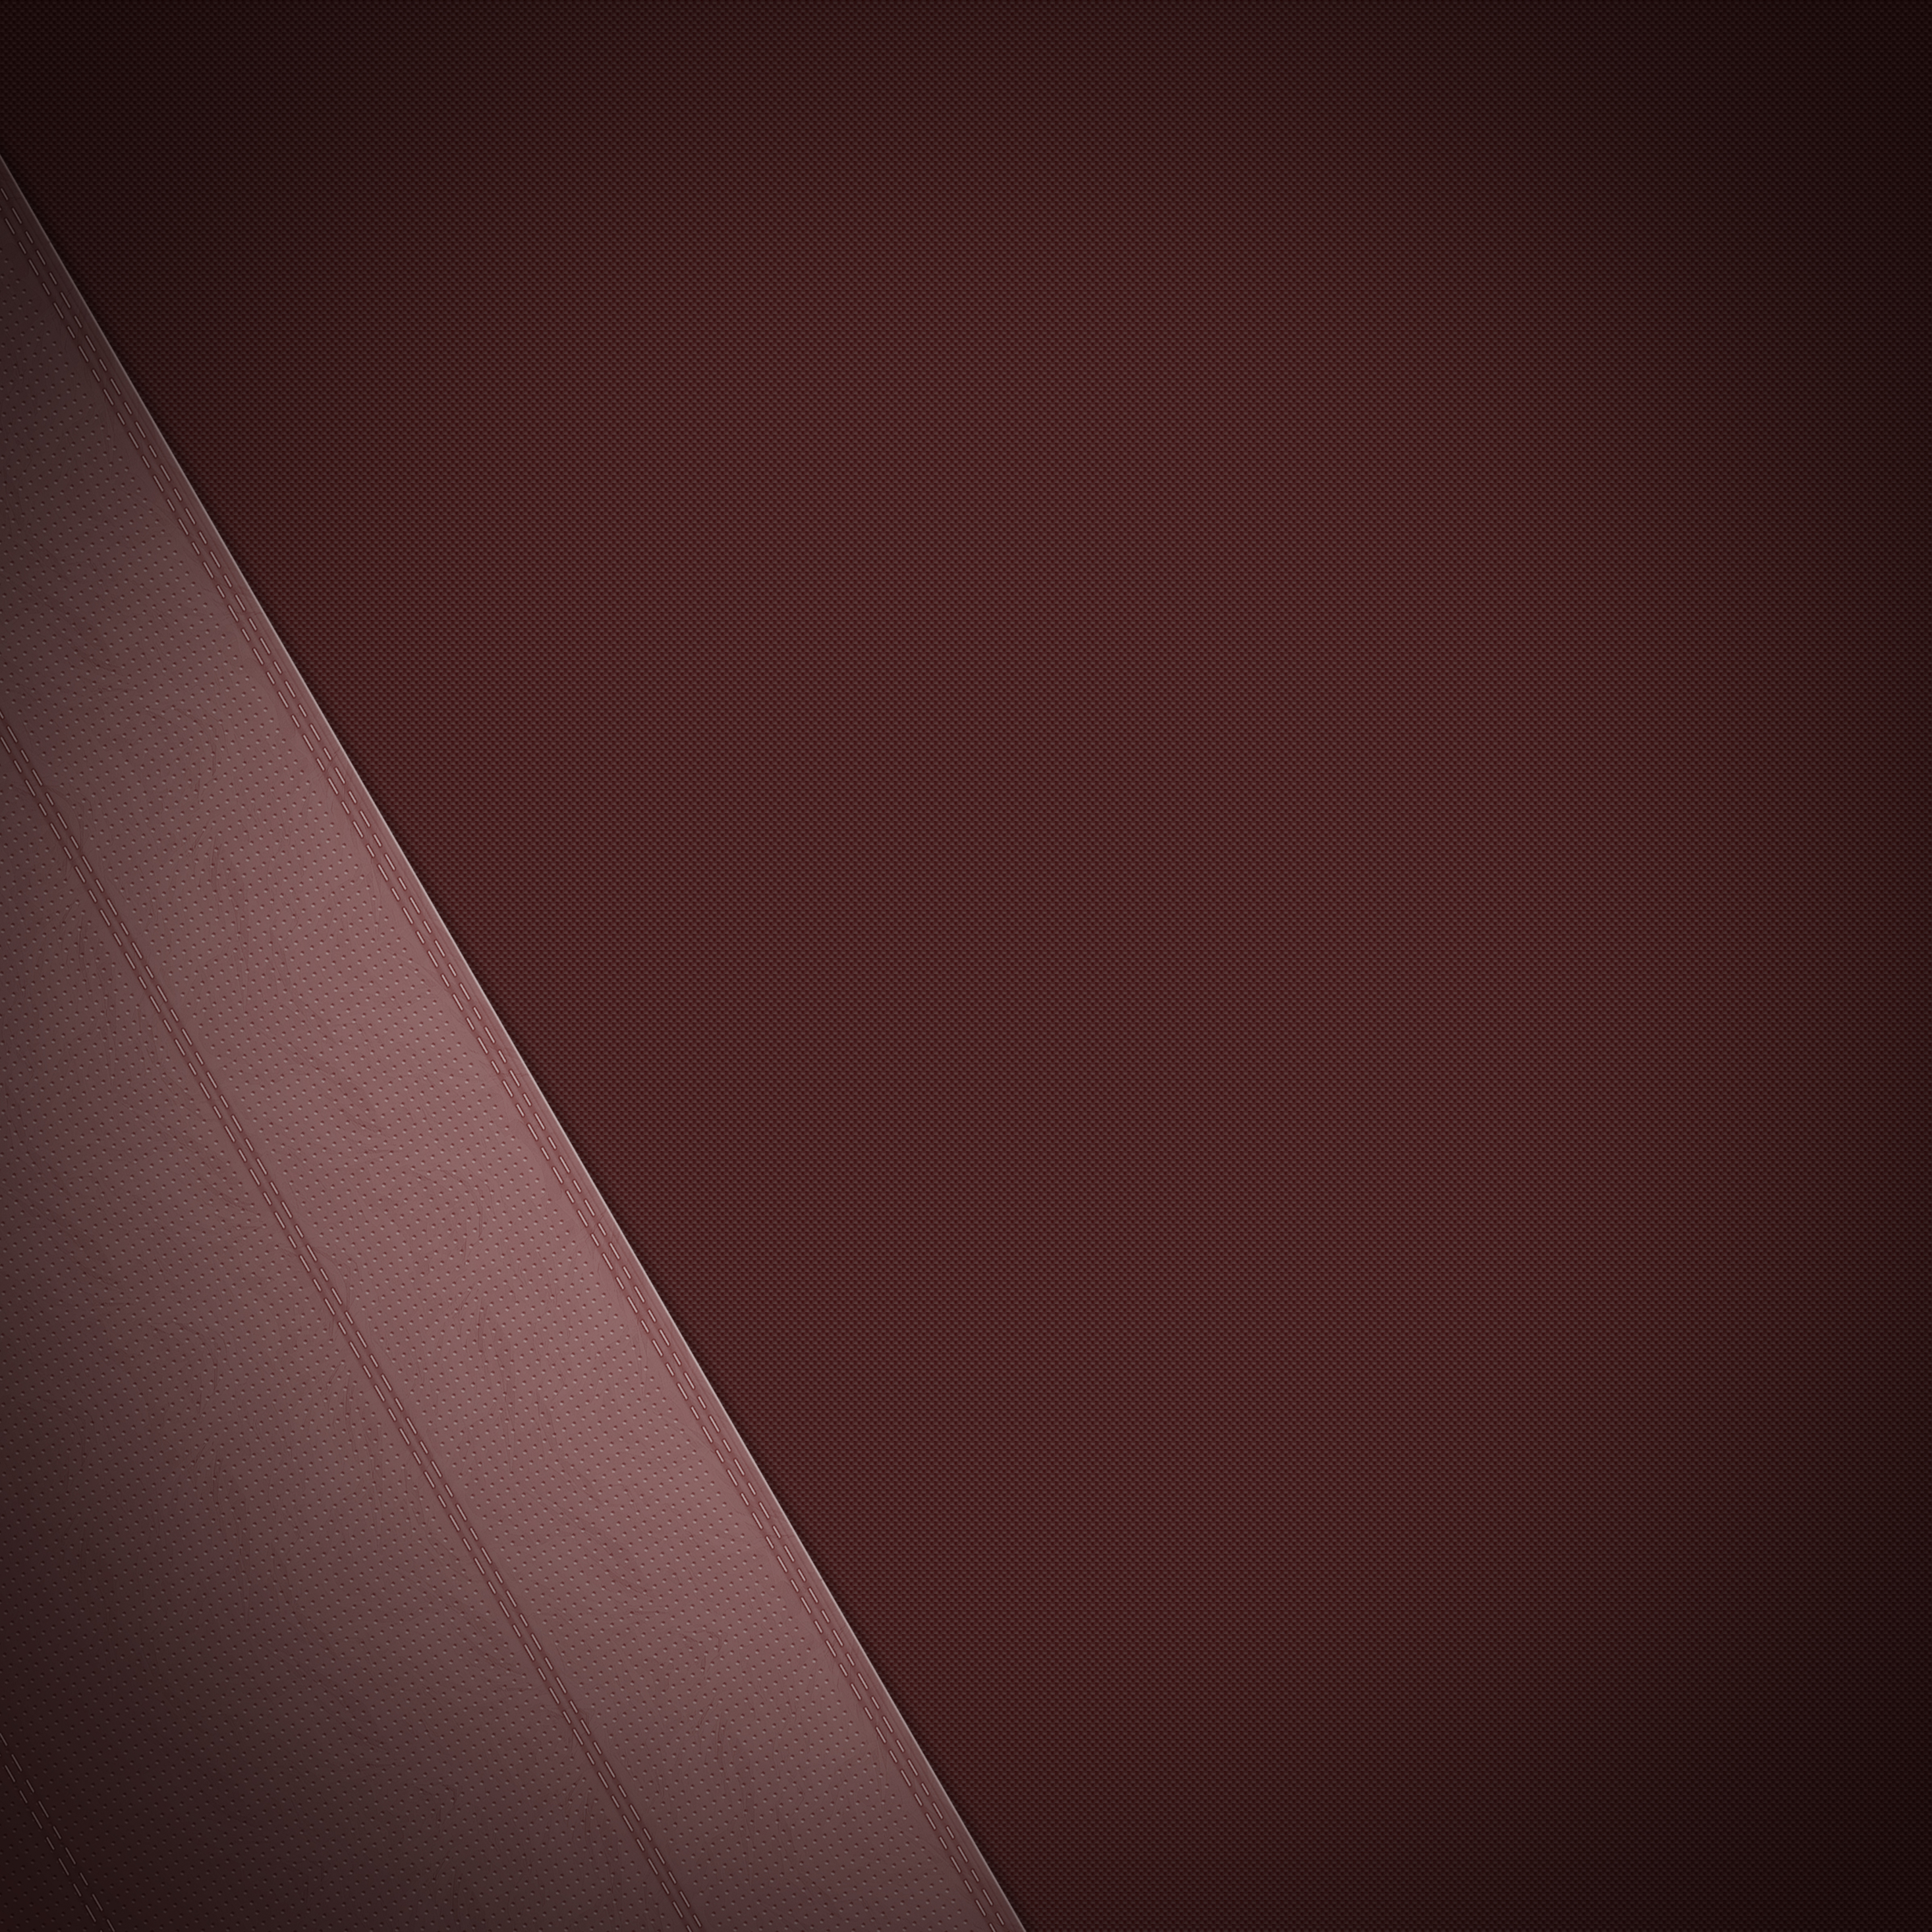 2932x2932 Leather Texture Brown 4k Ipad Pro Retina Display HD 4k Wallpapers,  Images, Backgrounds, Photos and Pictures